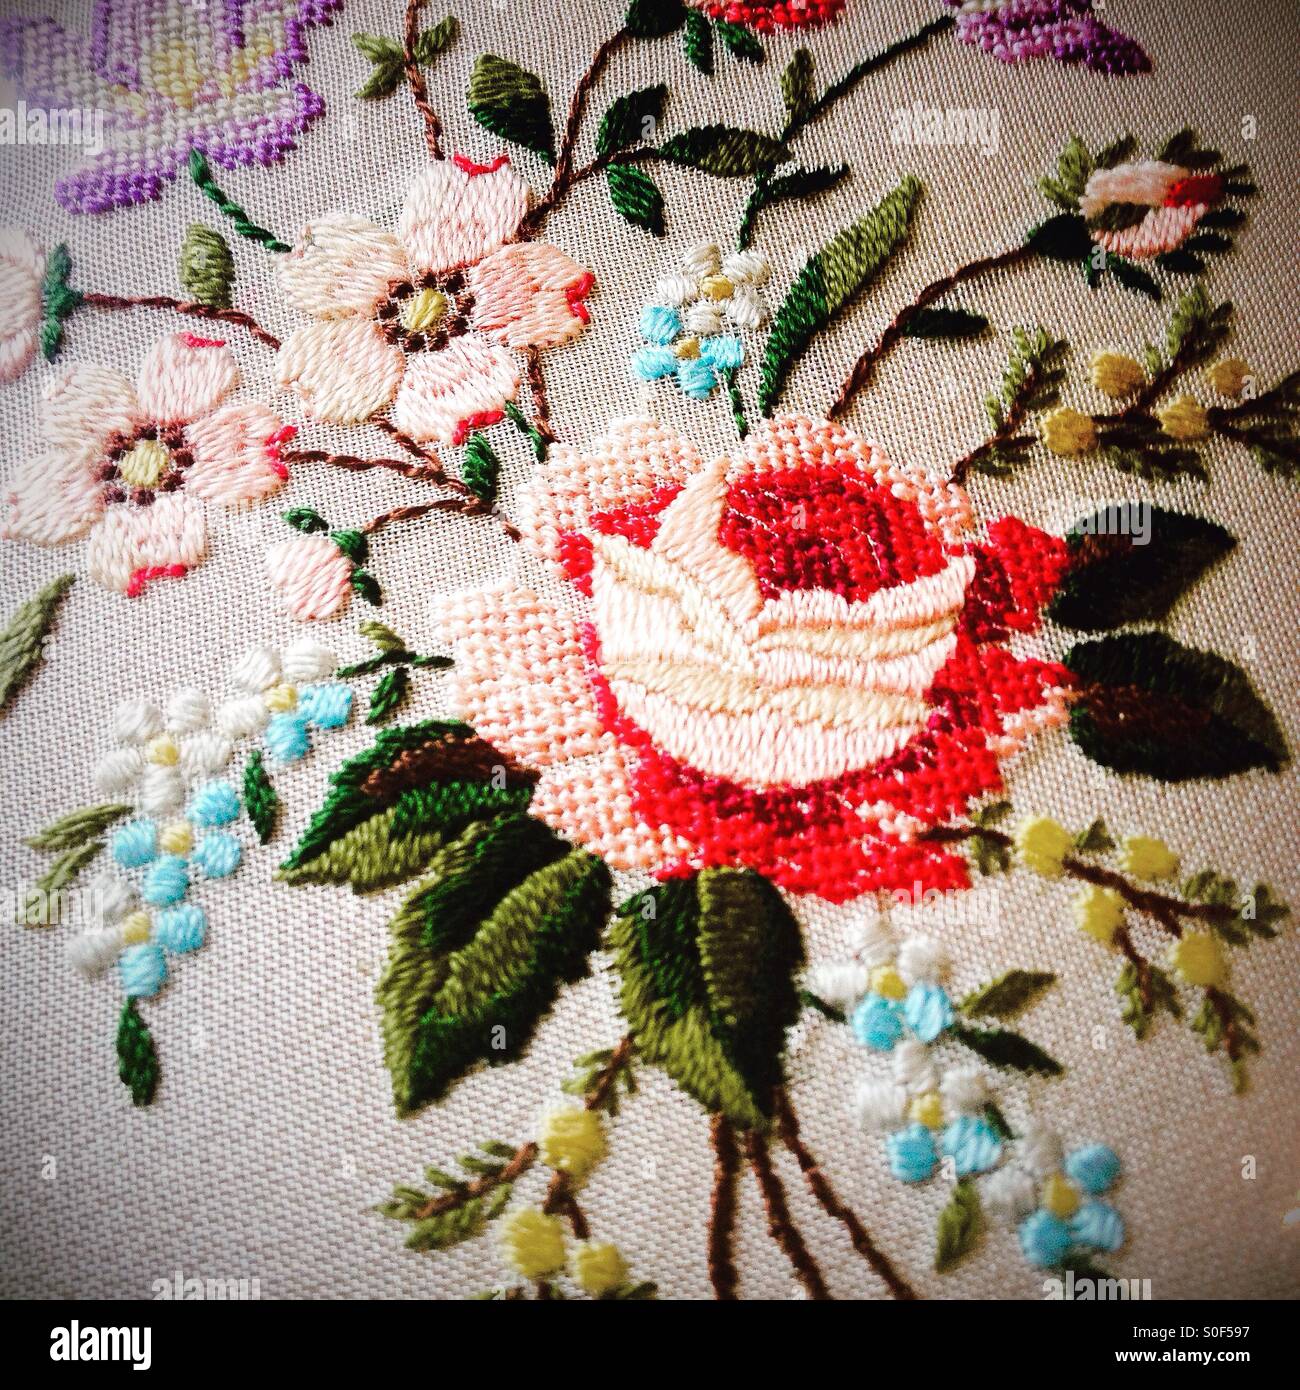 Needlepoint: How to start a Petit Point embroidery project